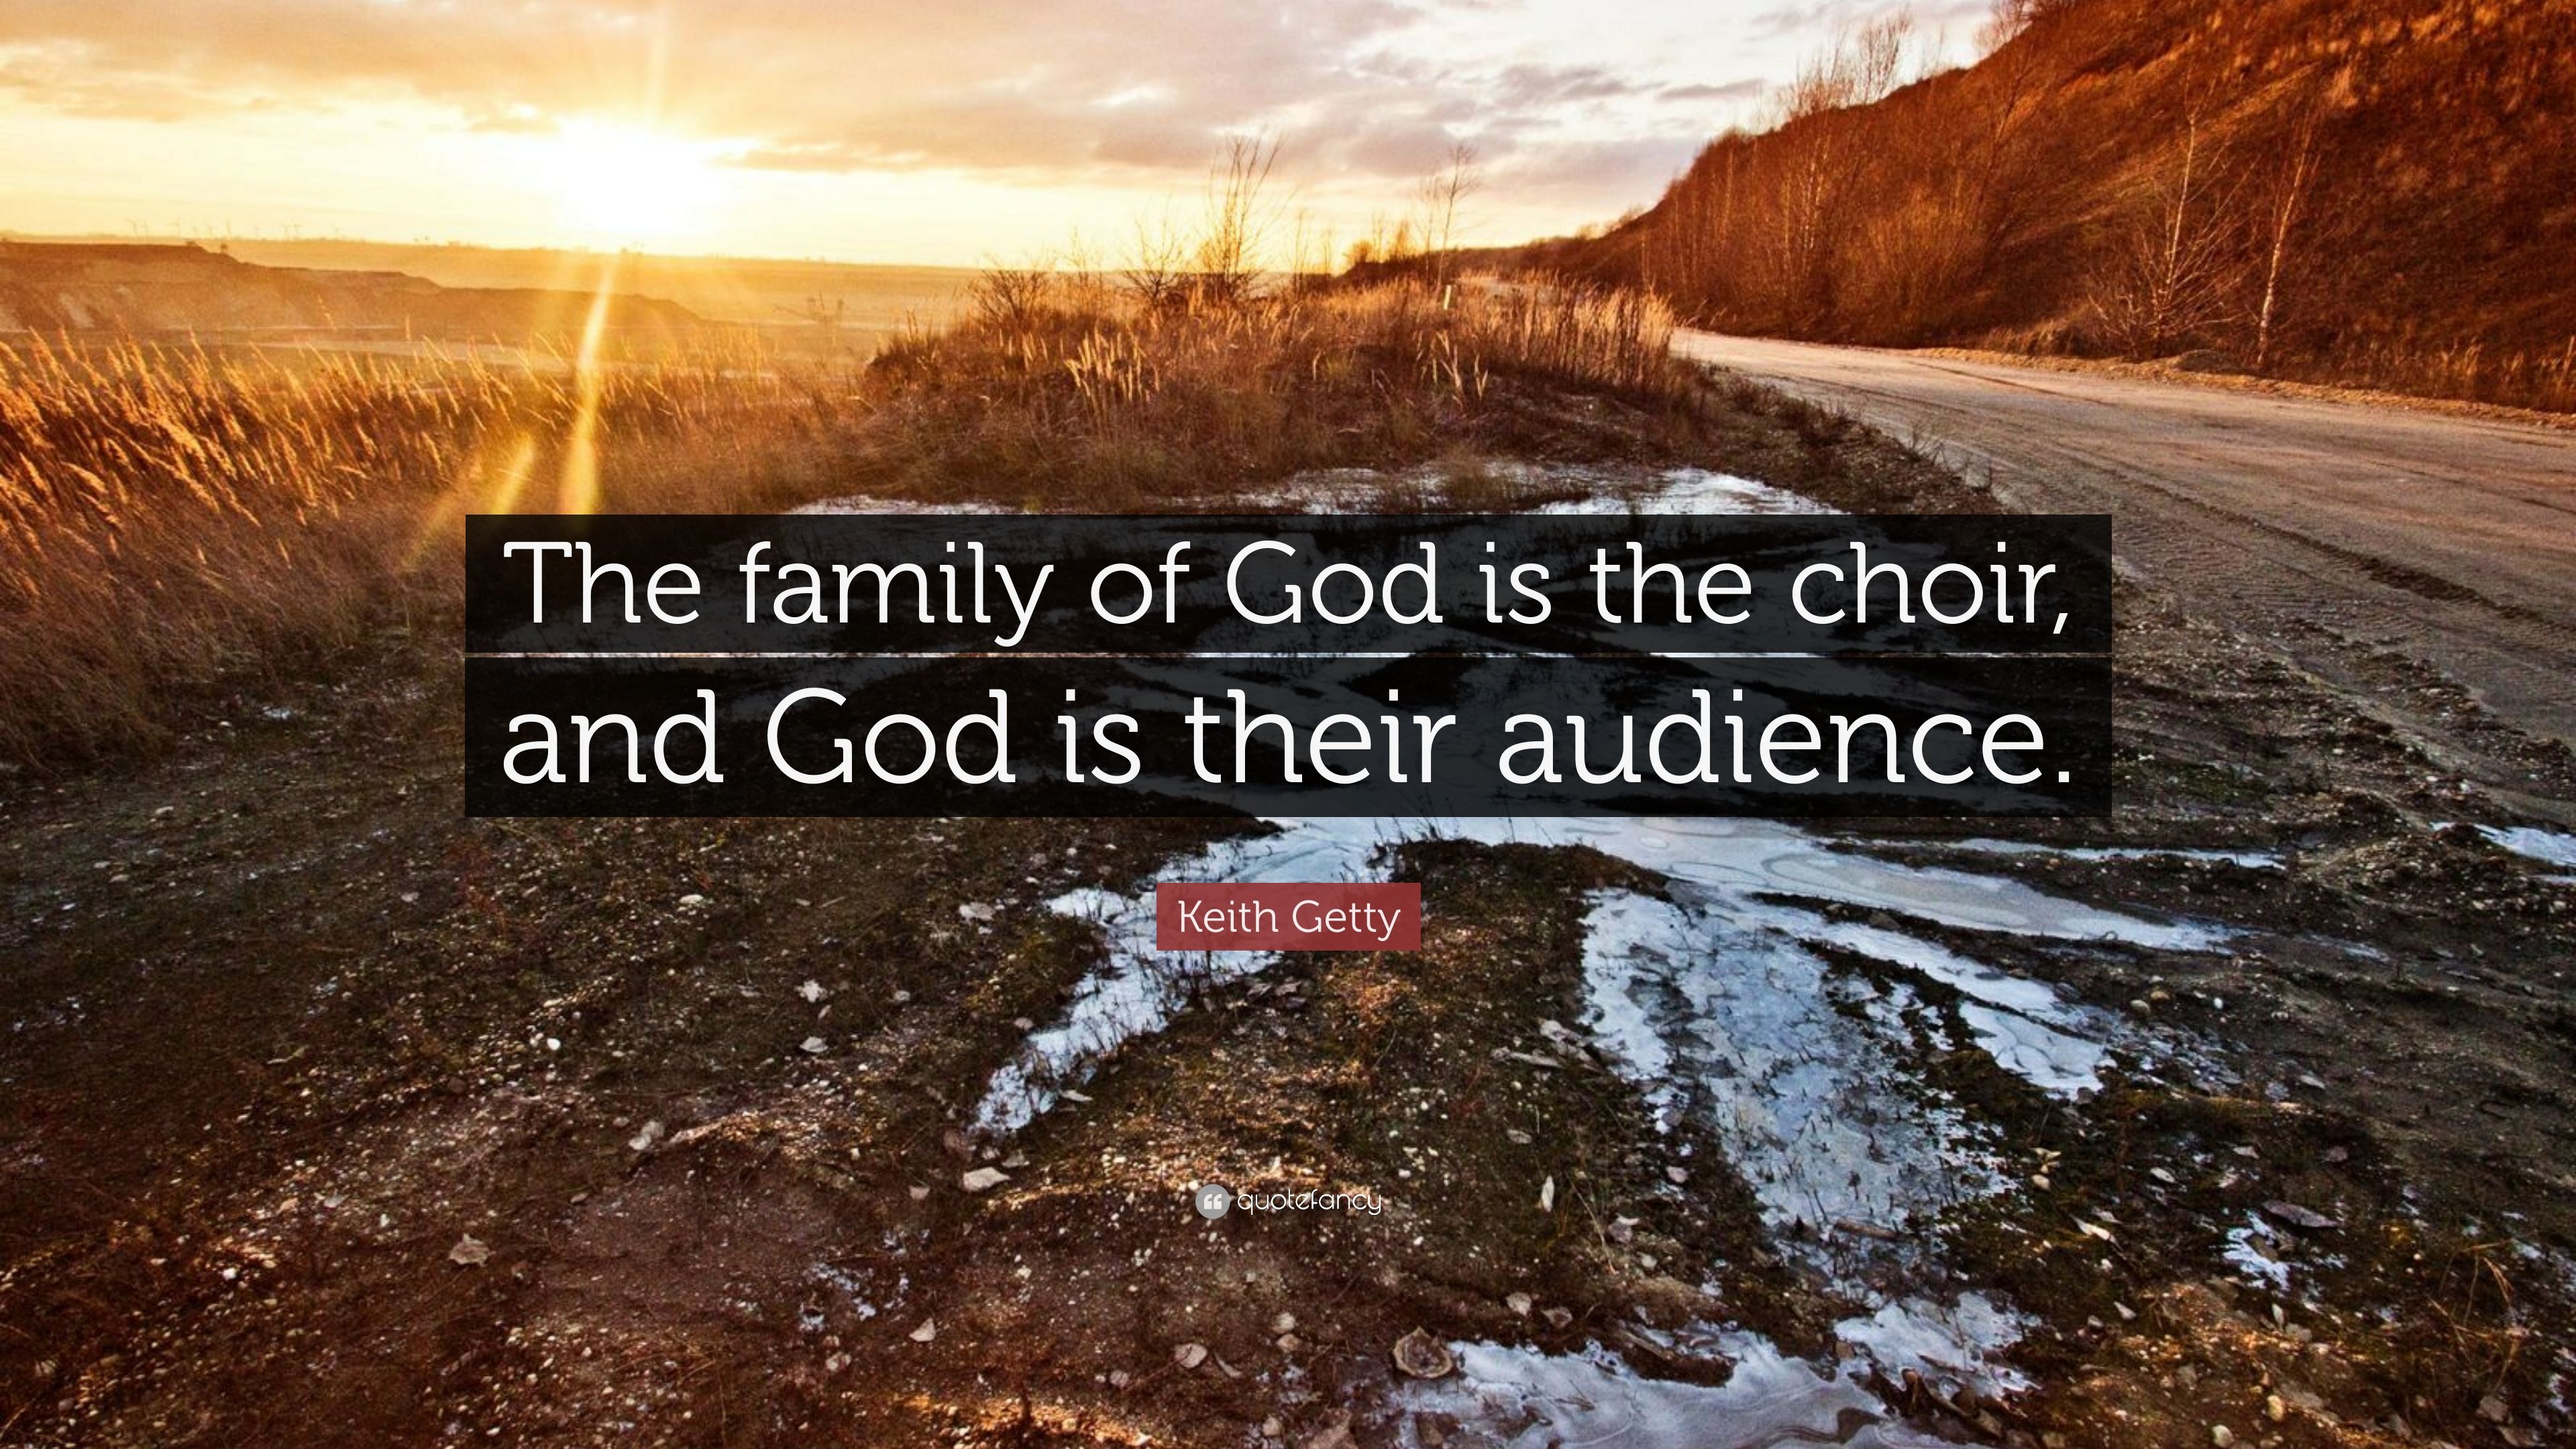 Keith Getty Quote: “The family of God is the choir, and God is